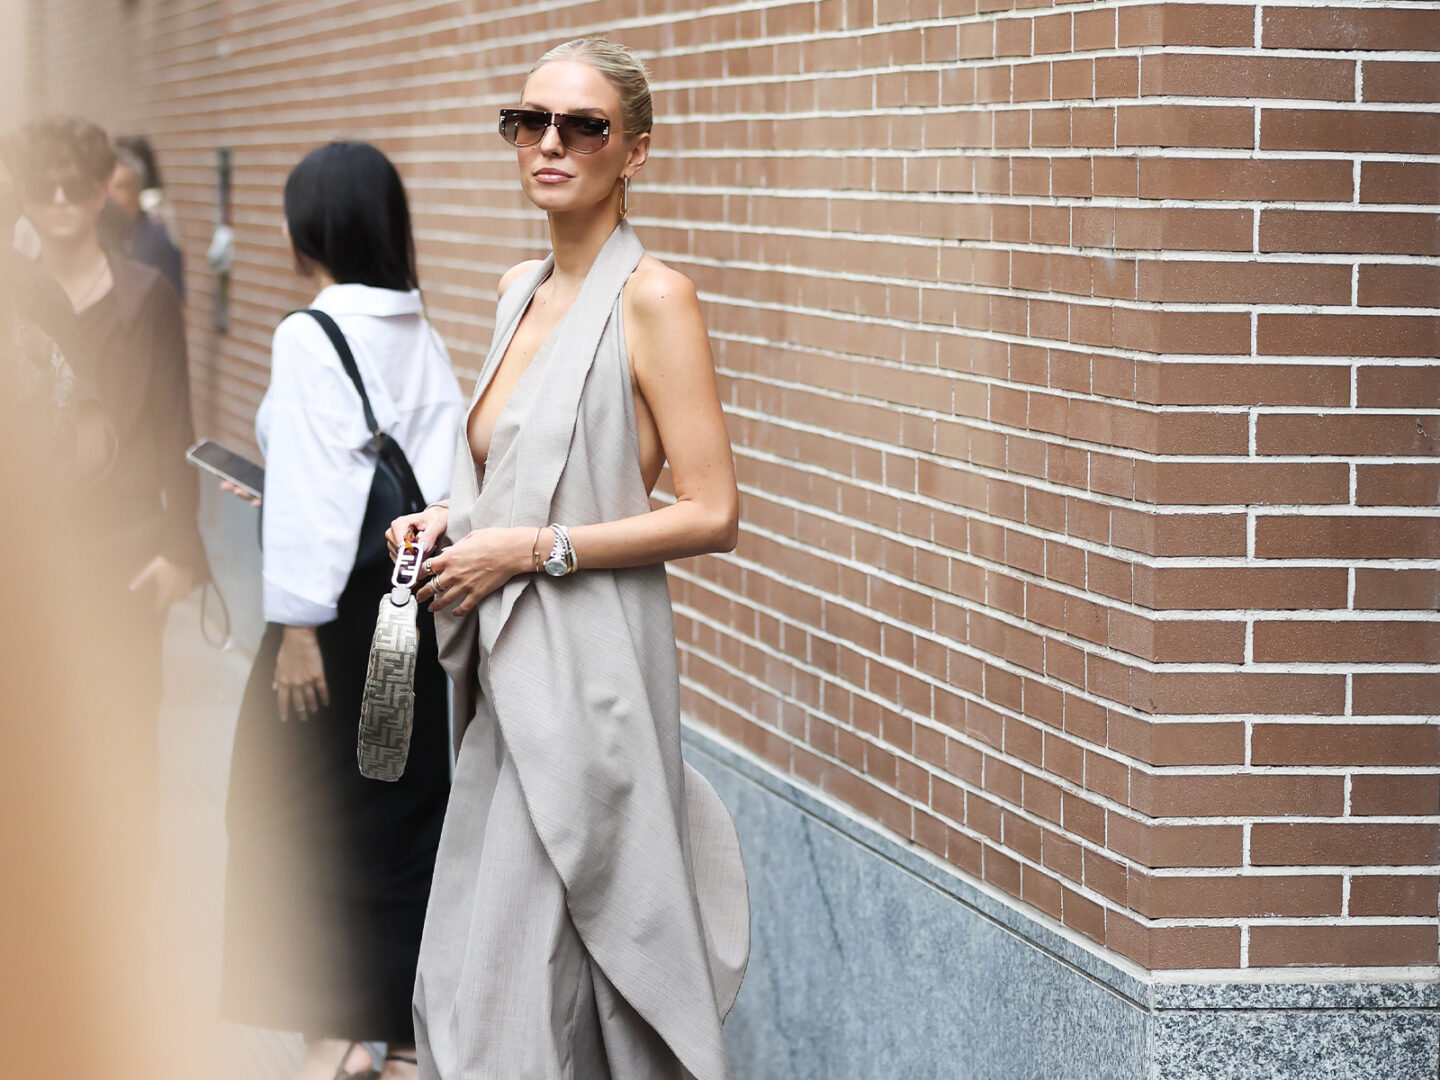 Milano Fashion Week: These have been the best streetstyles